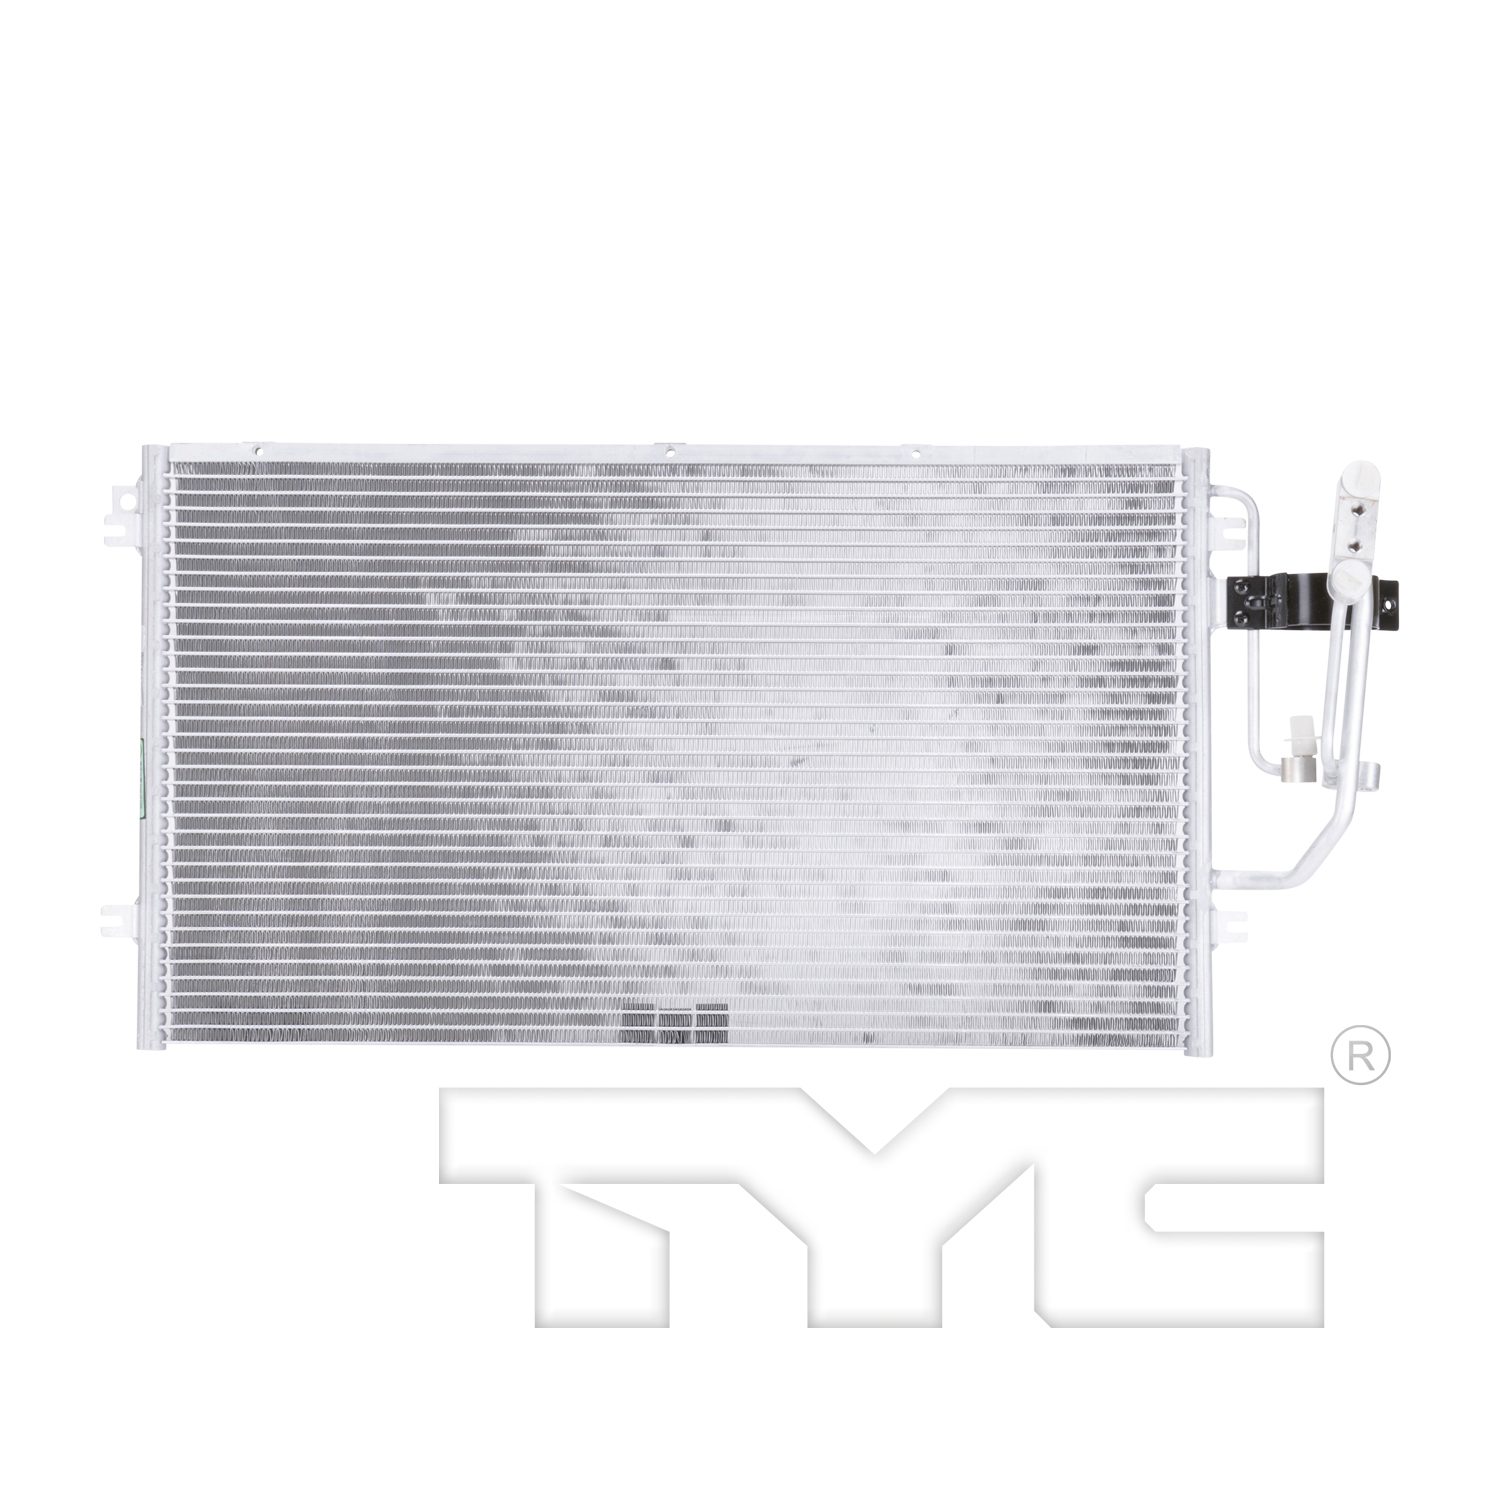 Aftermarket AC CONDENSERS for SATURN - LS, LS,00-00,Air conditioning condenser